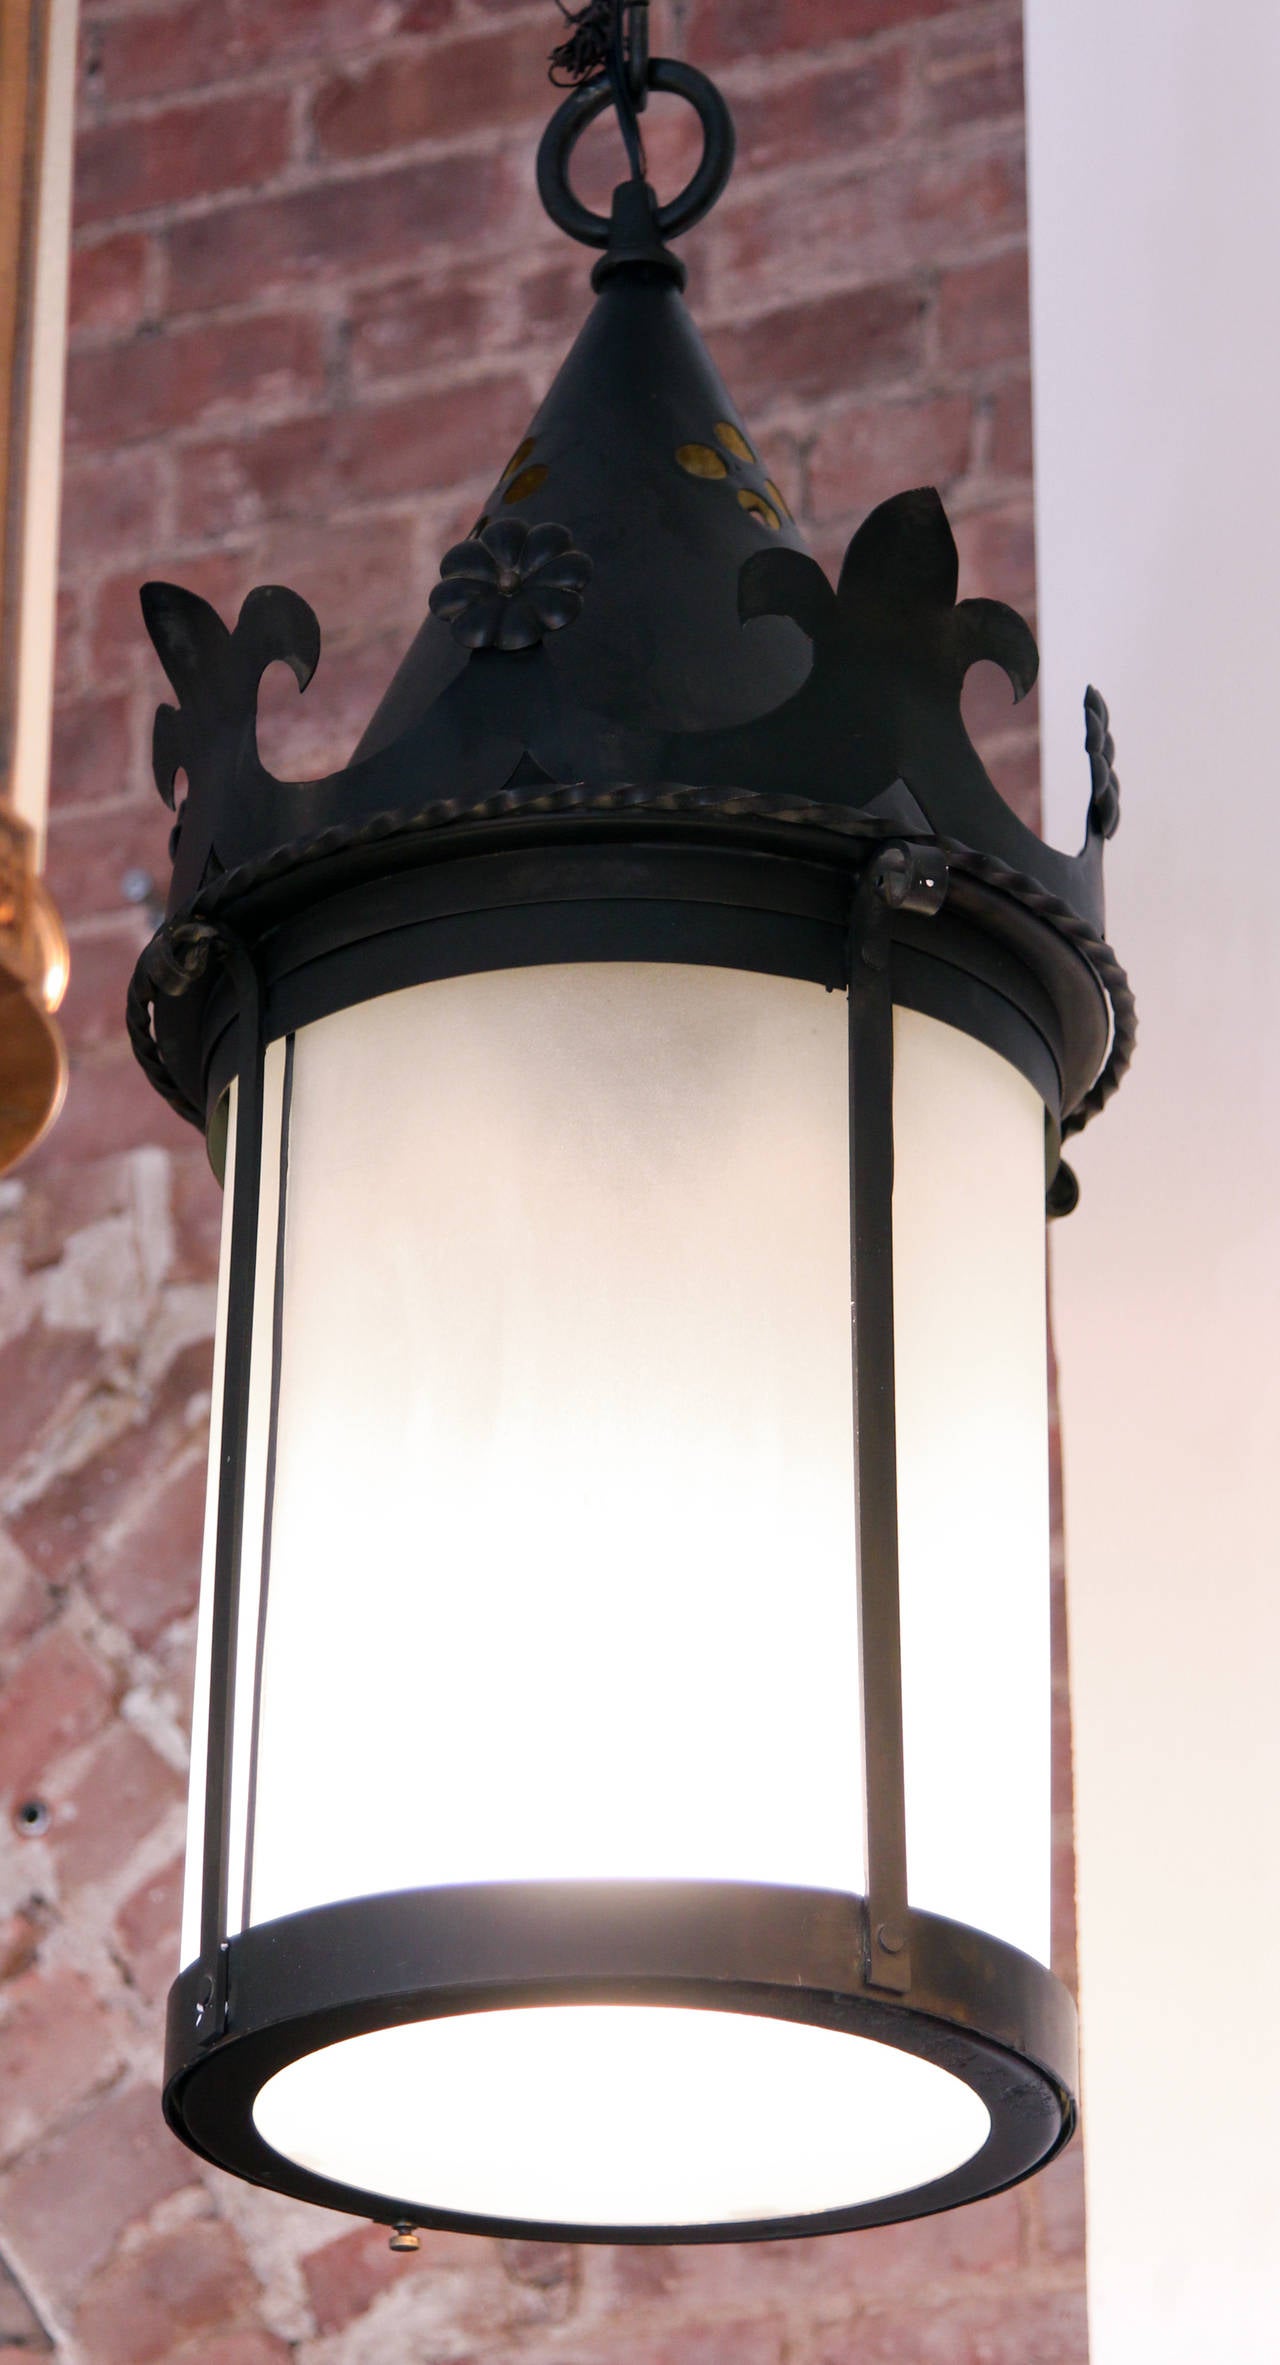 Gothic style lantern. American made in 1940s. This item can be viewed at our 302 Bowery location in Manhattan.